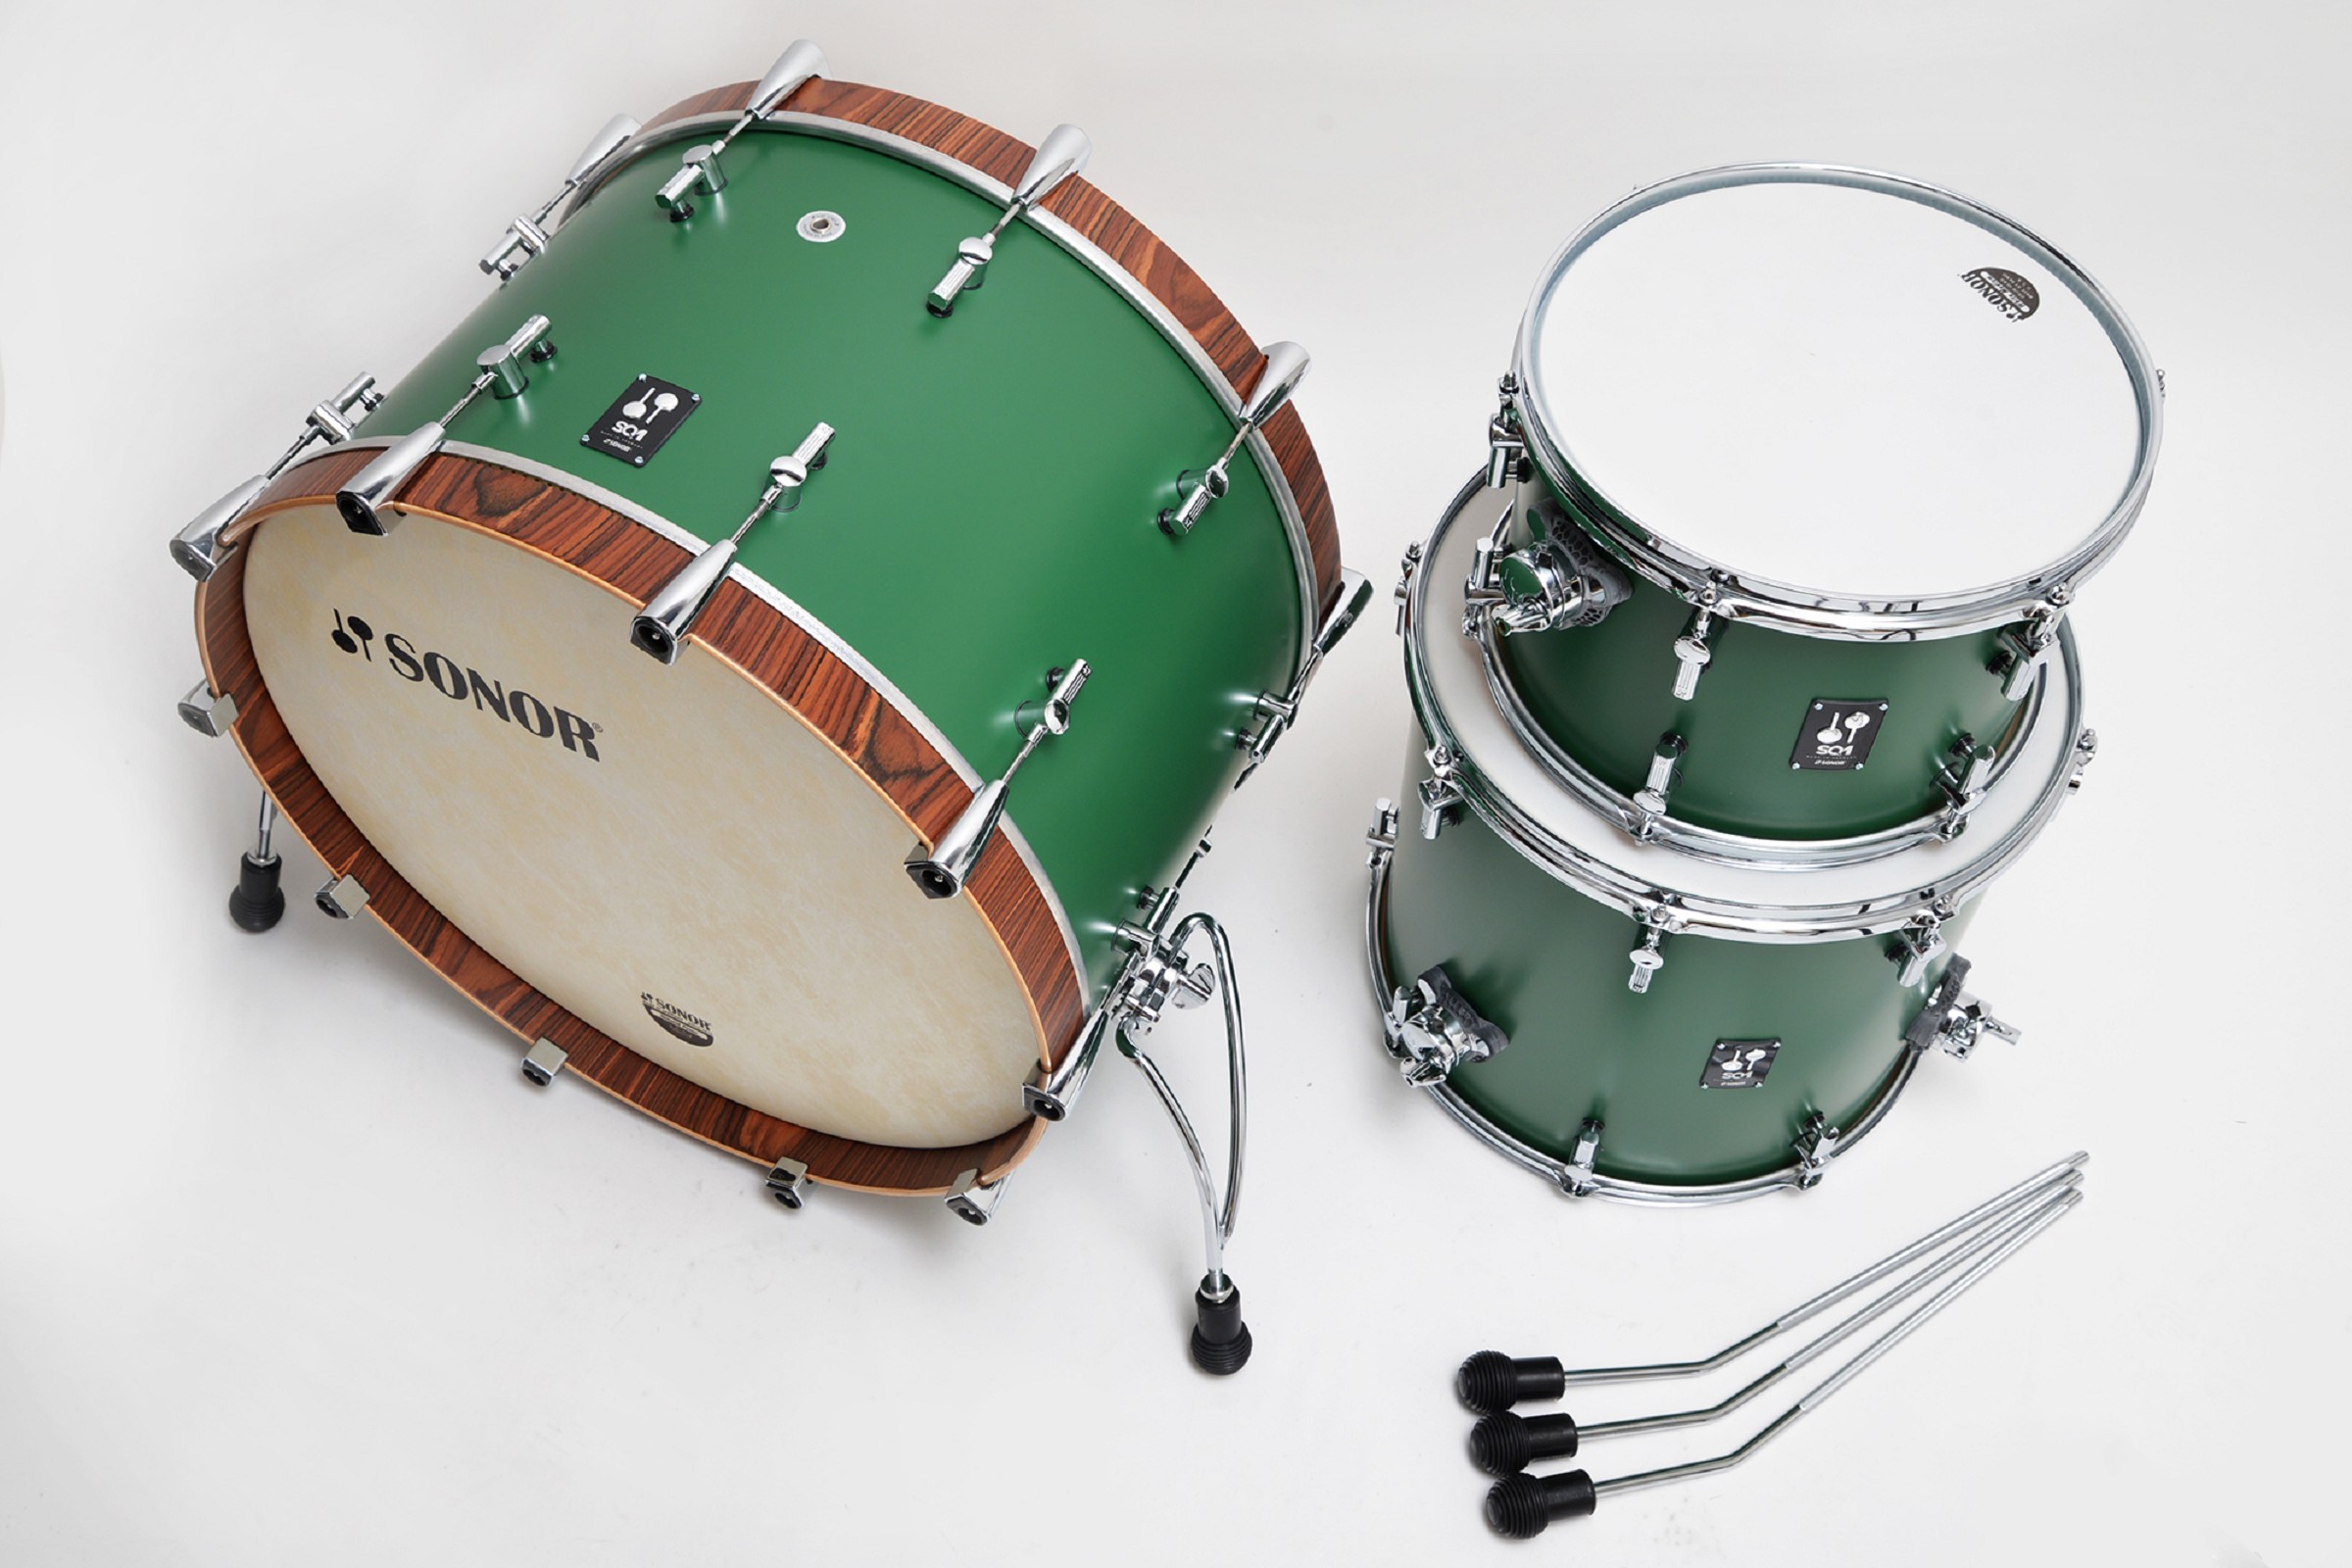 Sonor SQ1 Shell Set Roadster Green 24BD/13T/16FT